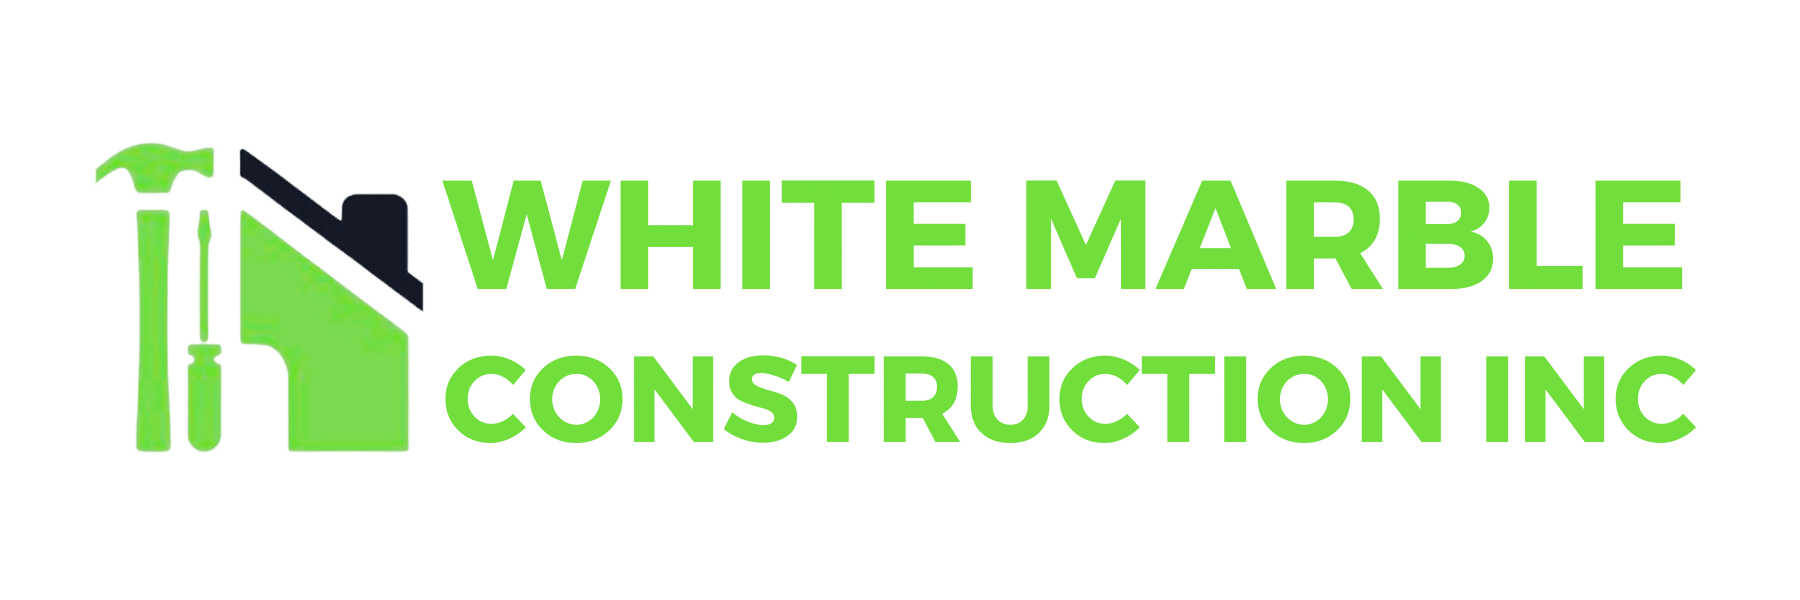 White Marble Construction Inc